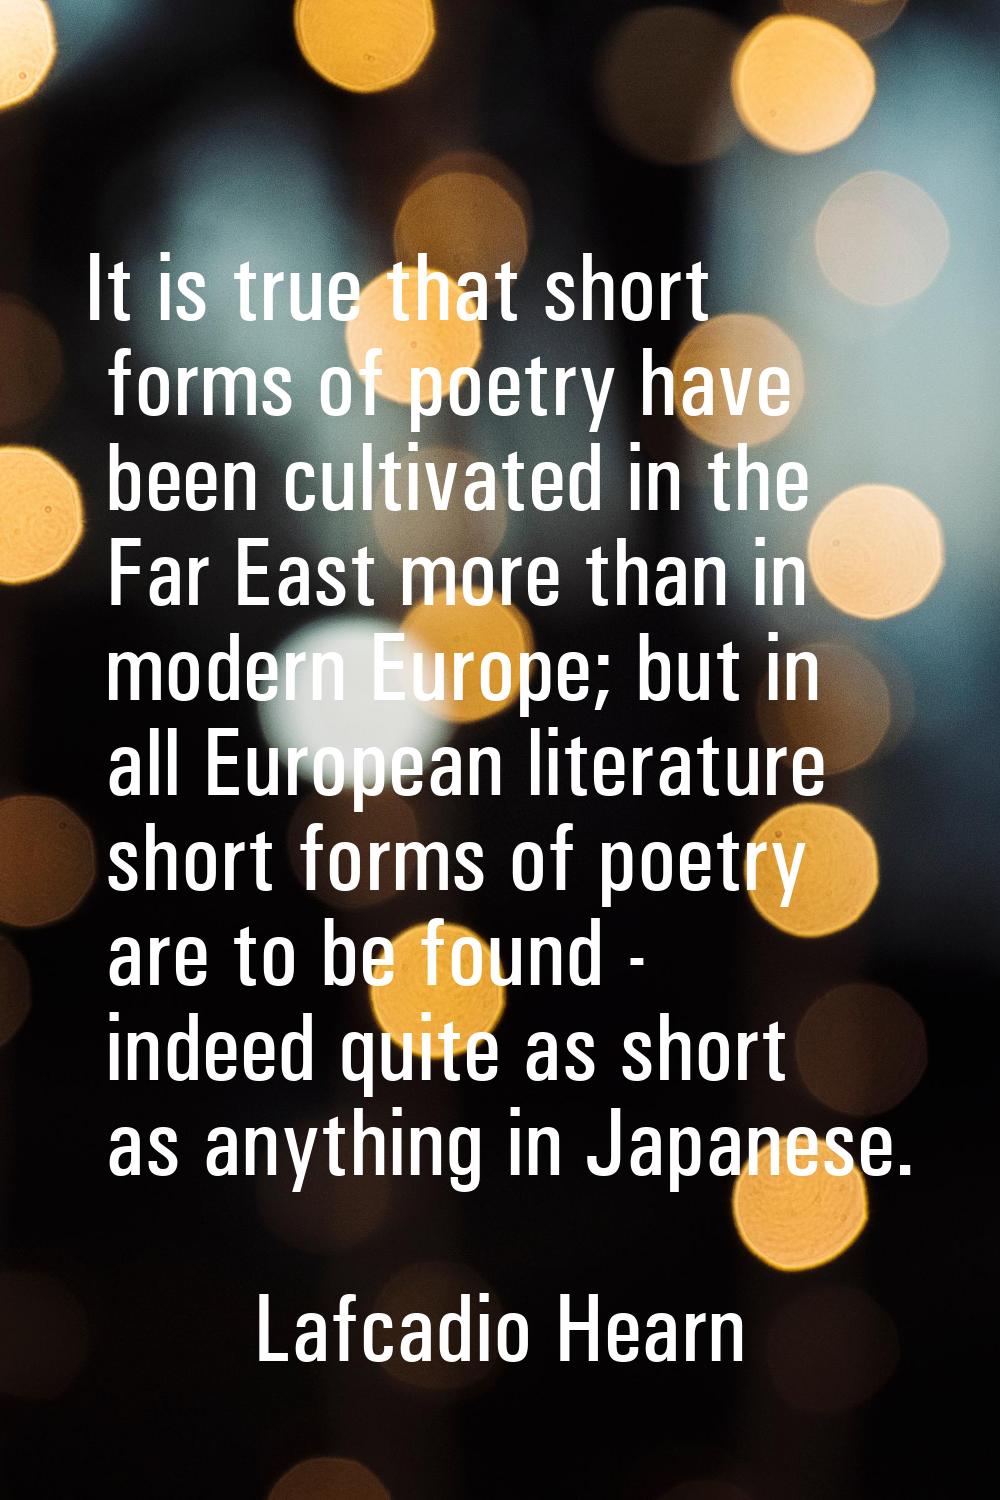 It is true that short forms of poetry have been cultivated in the Far East more than in modern Euro